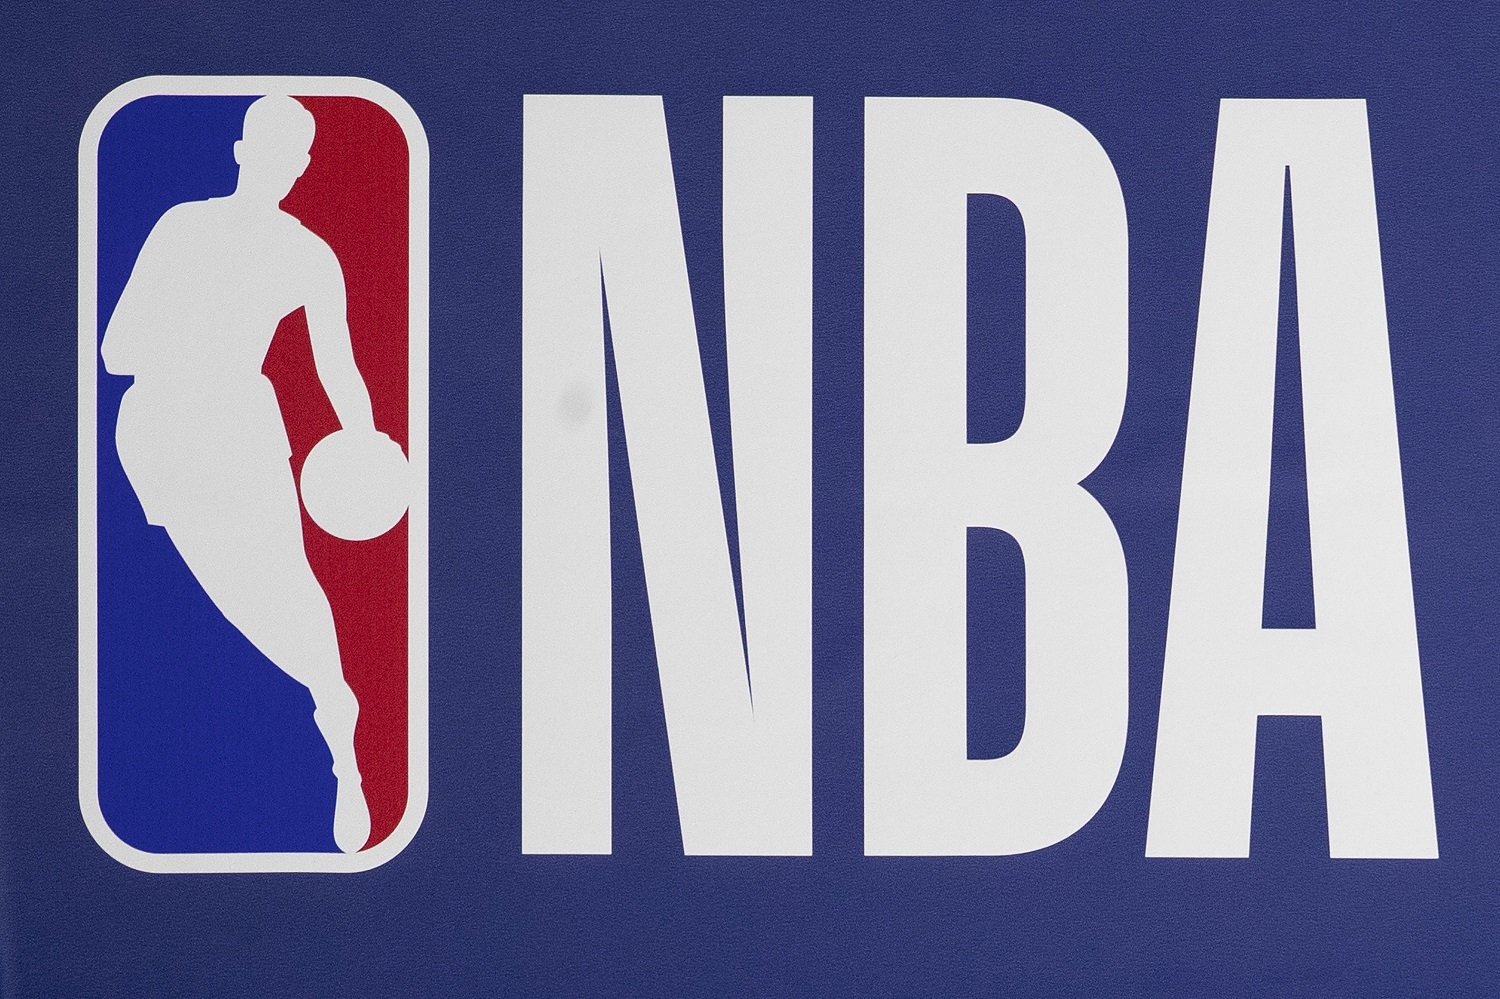 A detailed view of the NBA logo.